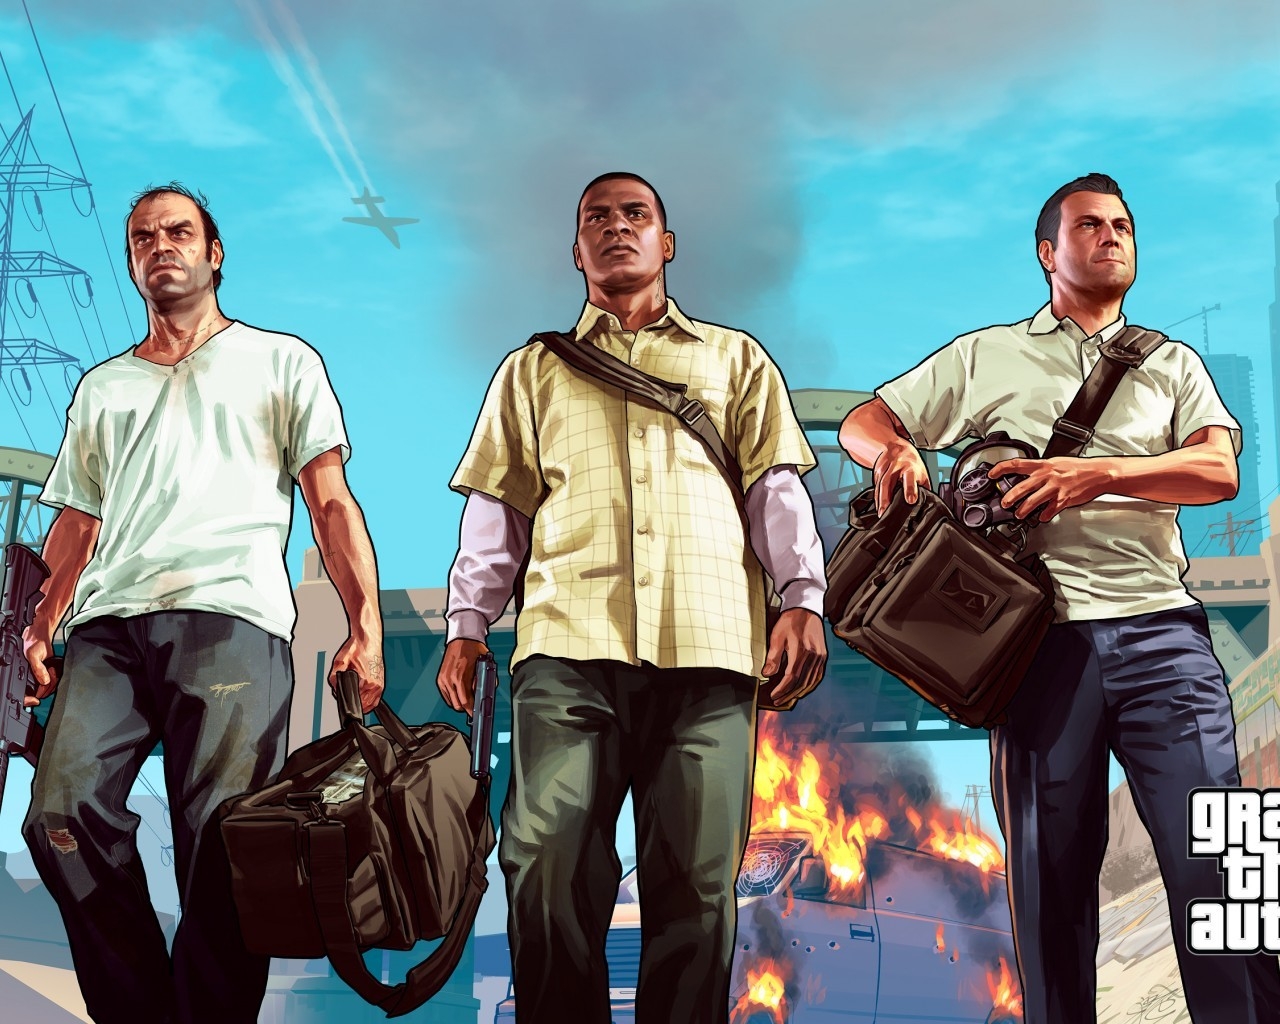 Grand Theft Auto Vice City for 1280 x 1024 resolution